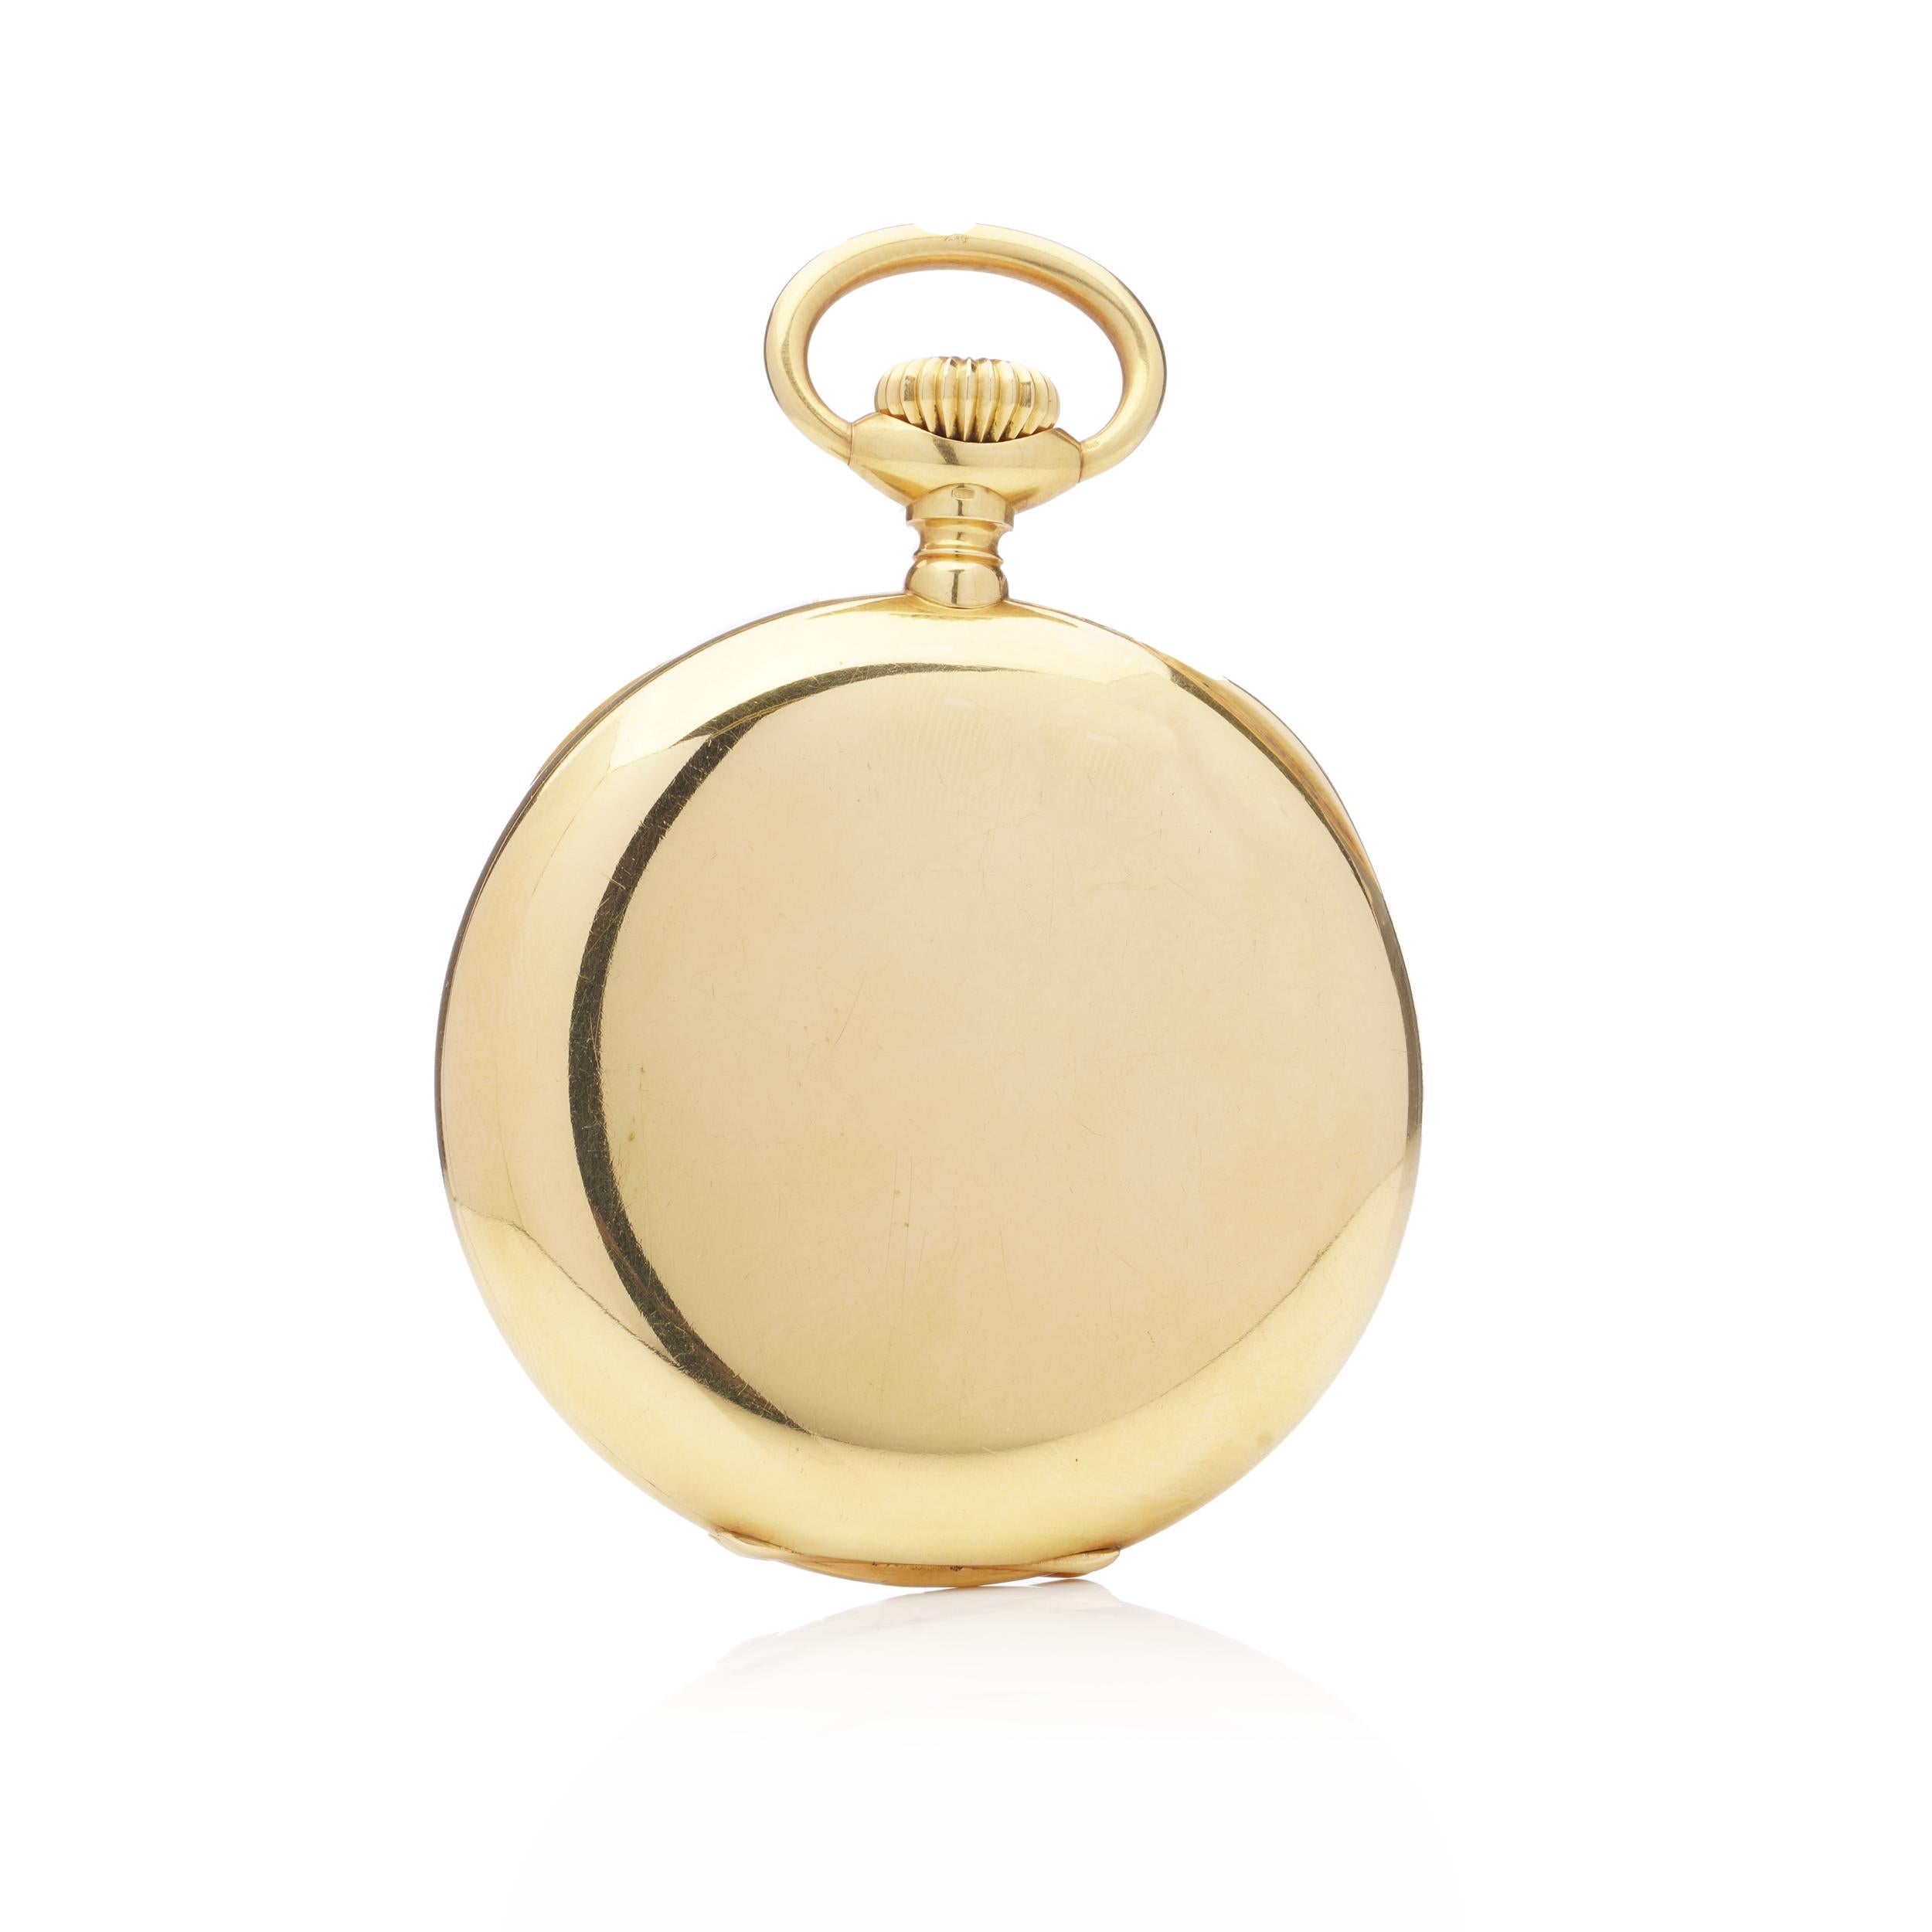 Patek Philippe 18kt. yellow gold Gondolo open-face pocket watch In Good Condition For Sale In Braintree, GB